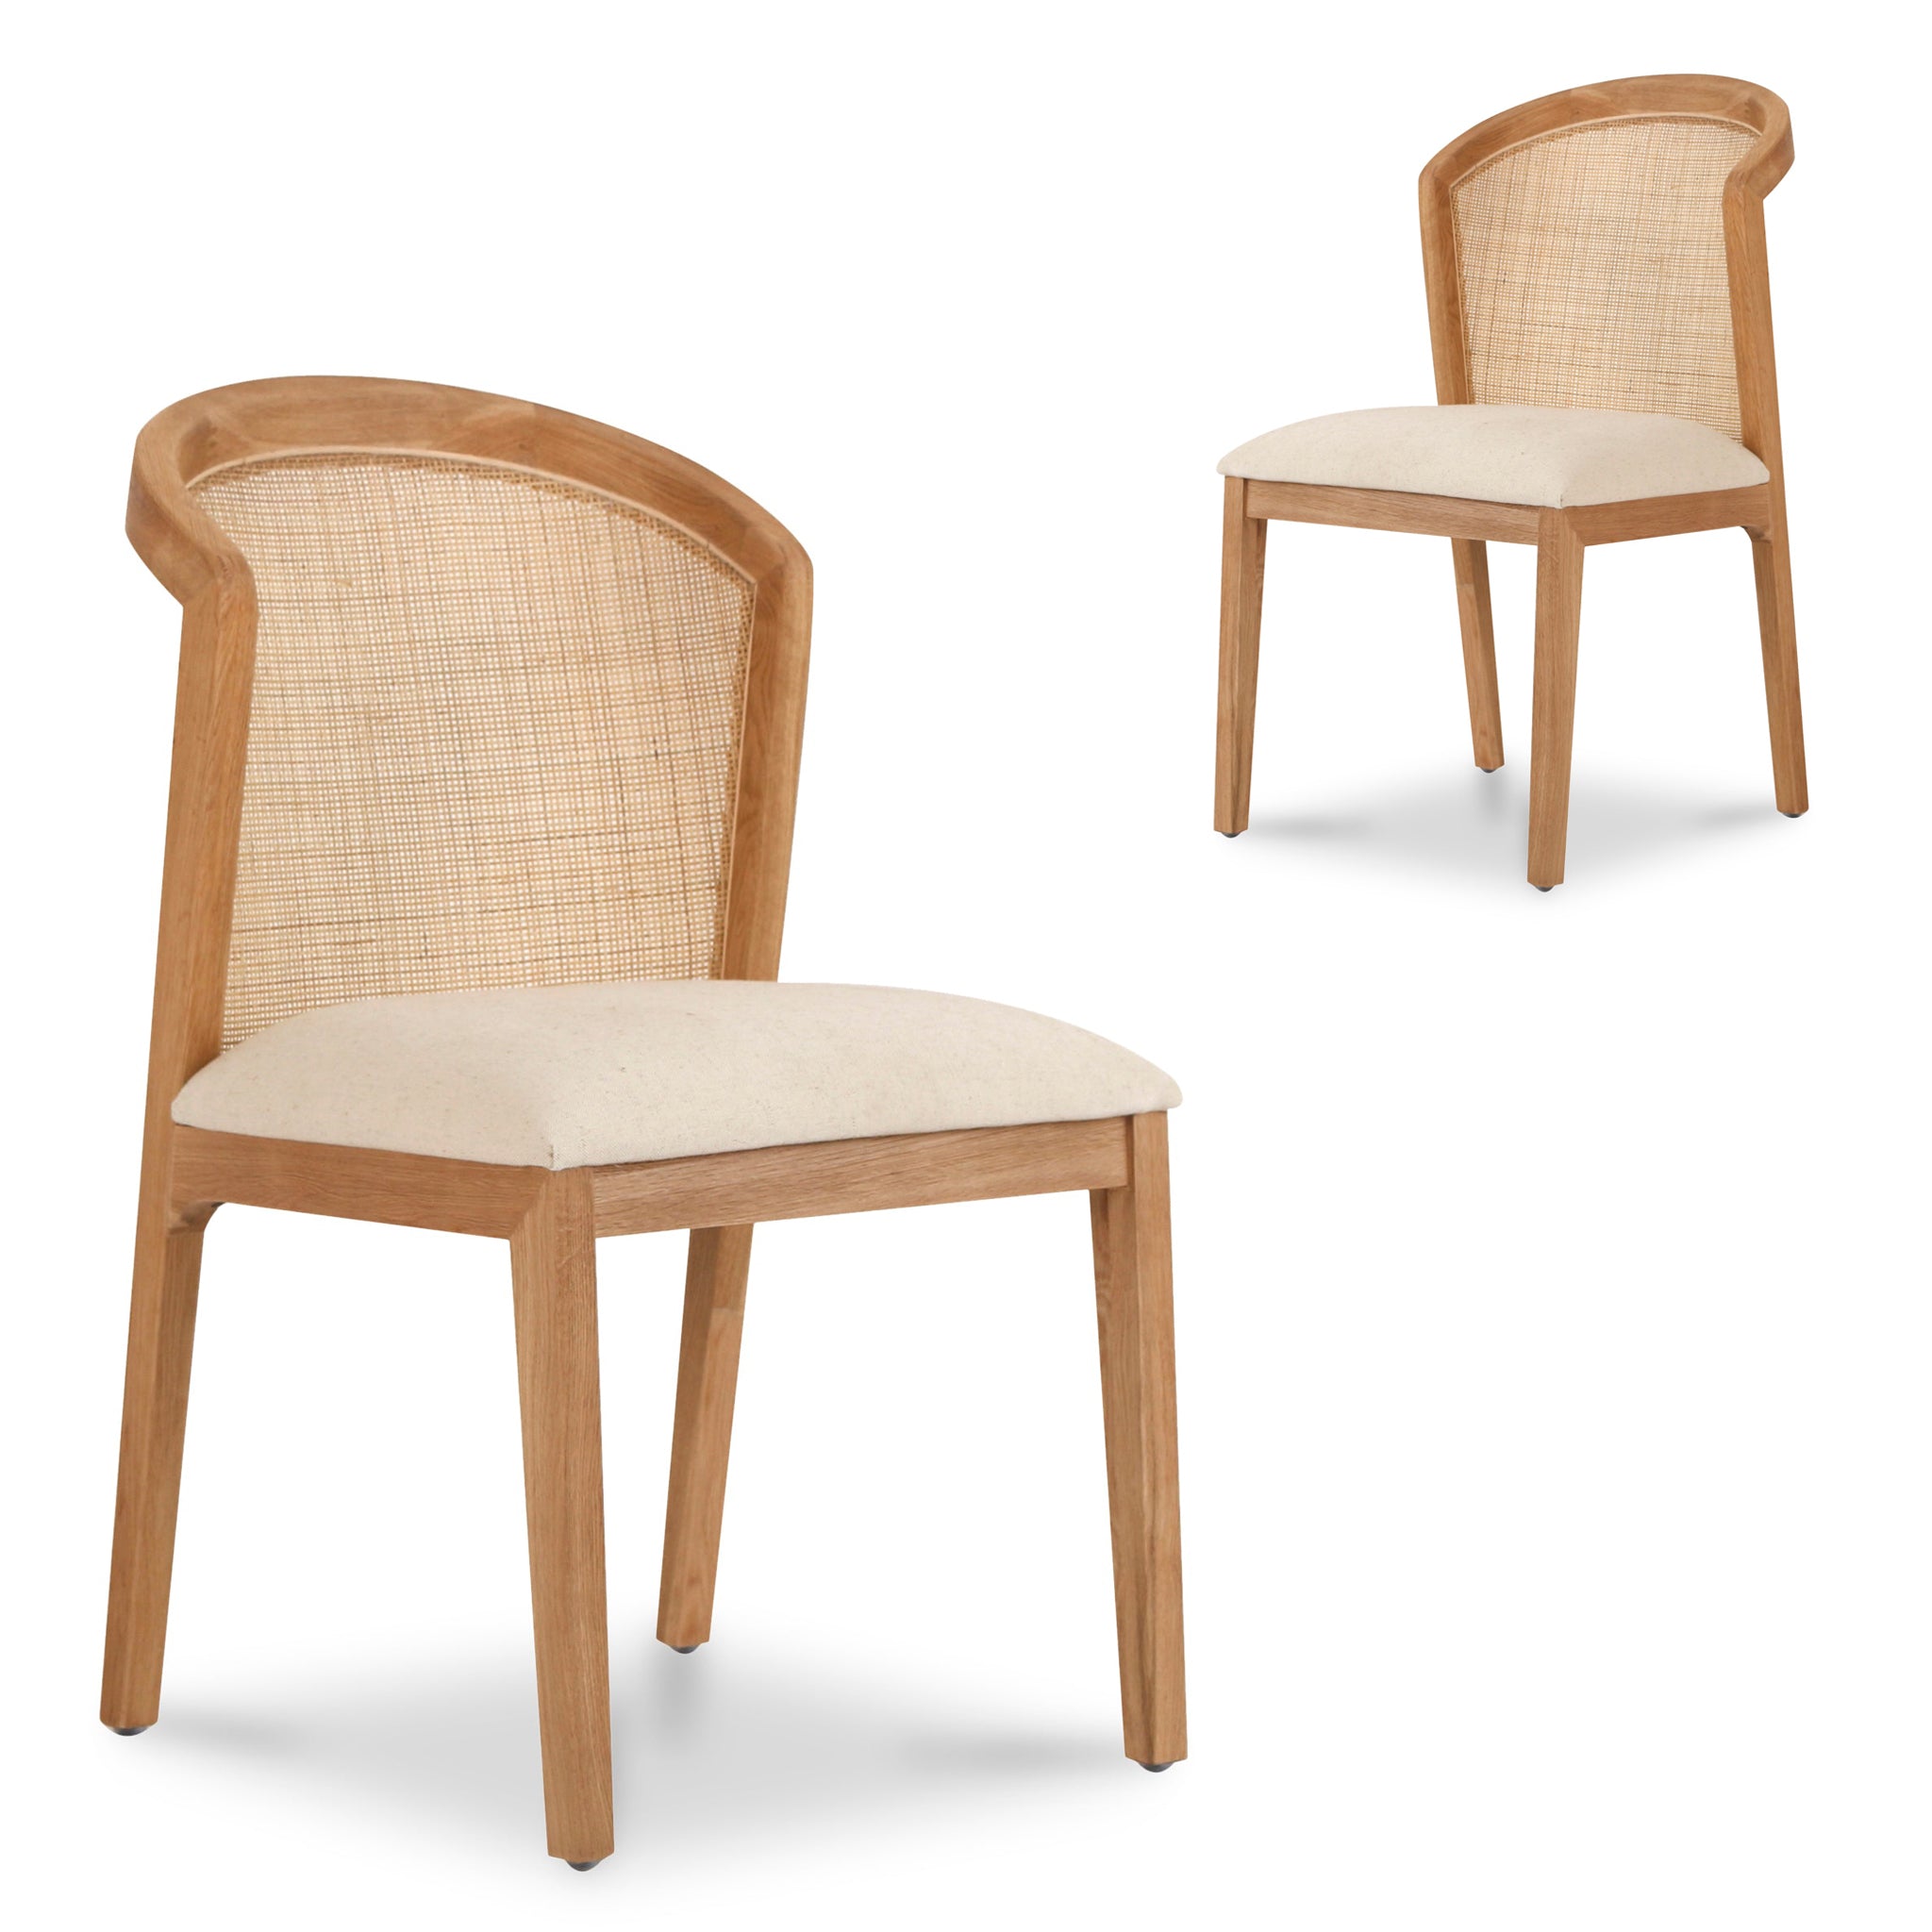 Set of 2 Edward Fabric Dining Chair - Light Beige - Dining Chairs